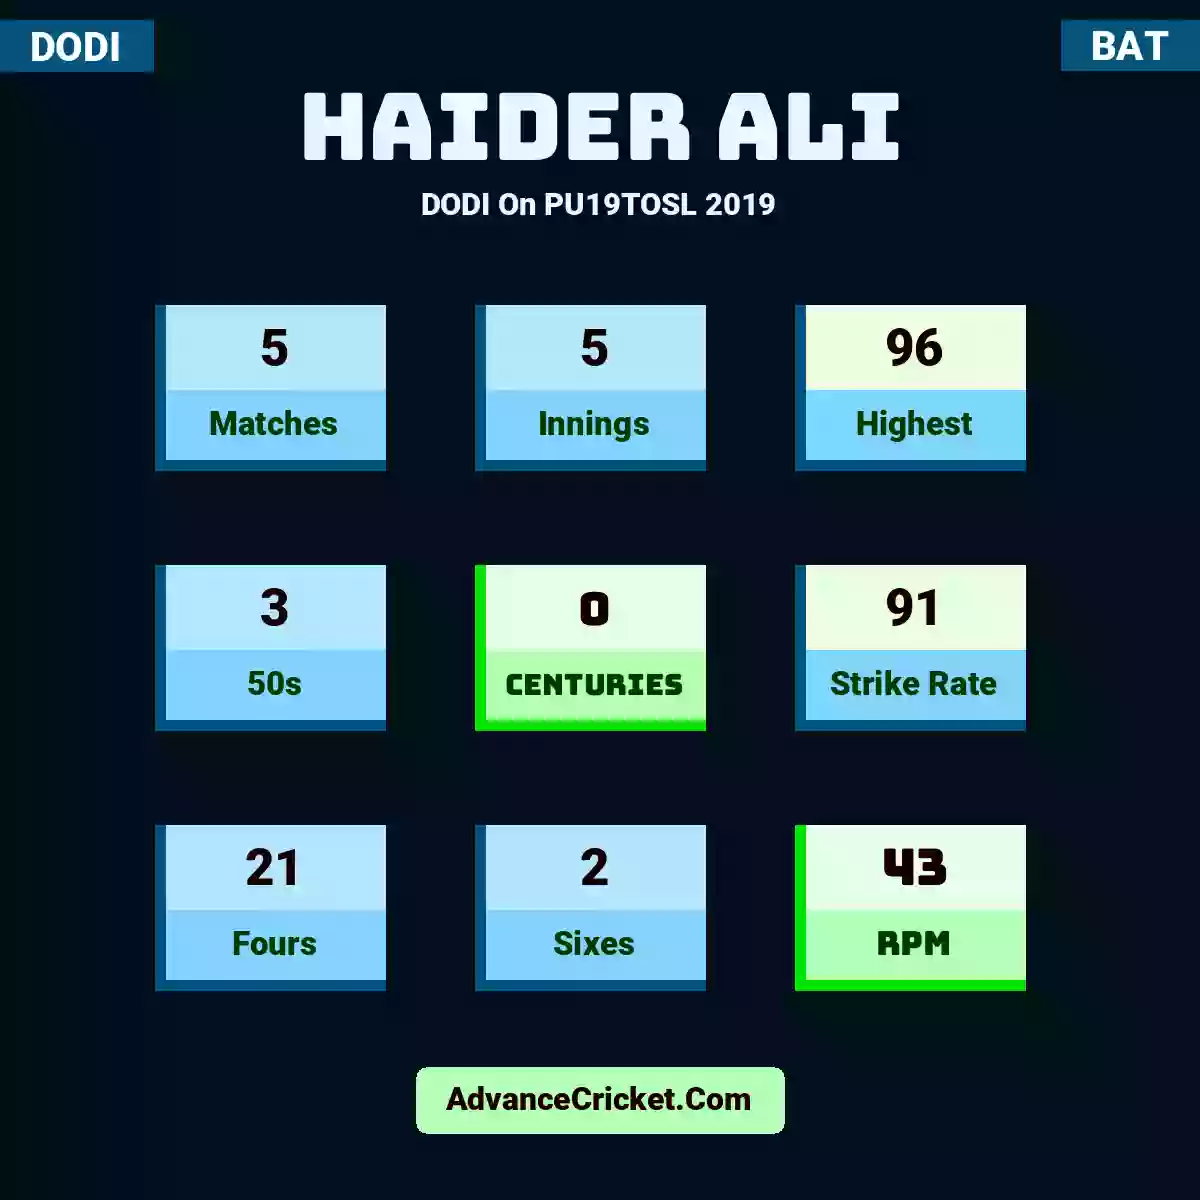 Haider Ali DODI  On PU19TOSL 2019, Haider Ali played 5 matches, scored 96 runs as highest, 3 half-centuries, and 0 centuries, with a strike rate of 91. H.Ali hit 21 fours and 2 sixes, with an RPM of 43.